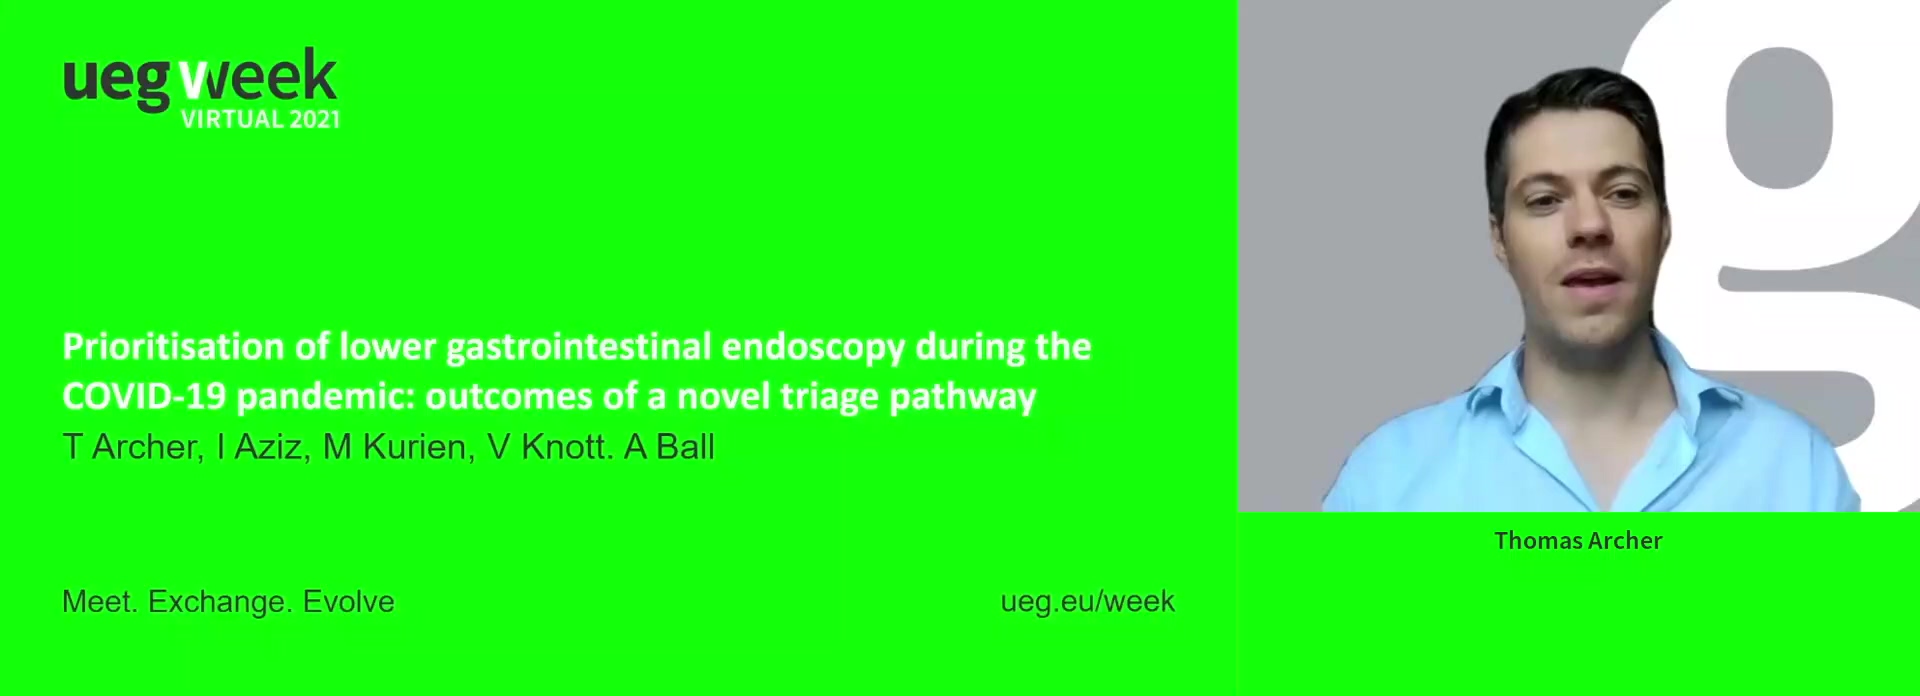 PRIORITISATION OF LOWER GASTROINTESTINAL ENDOSCOPY DURING THE COVID-19 PANDEMIC: OUTCOMES OF A NOVEL TRIAGE PATHWAY